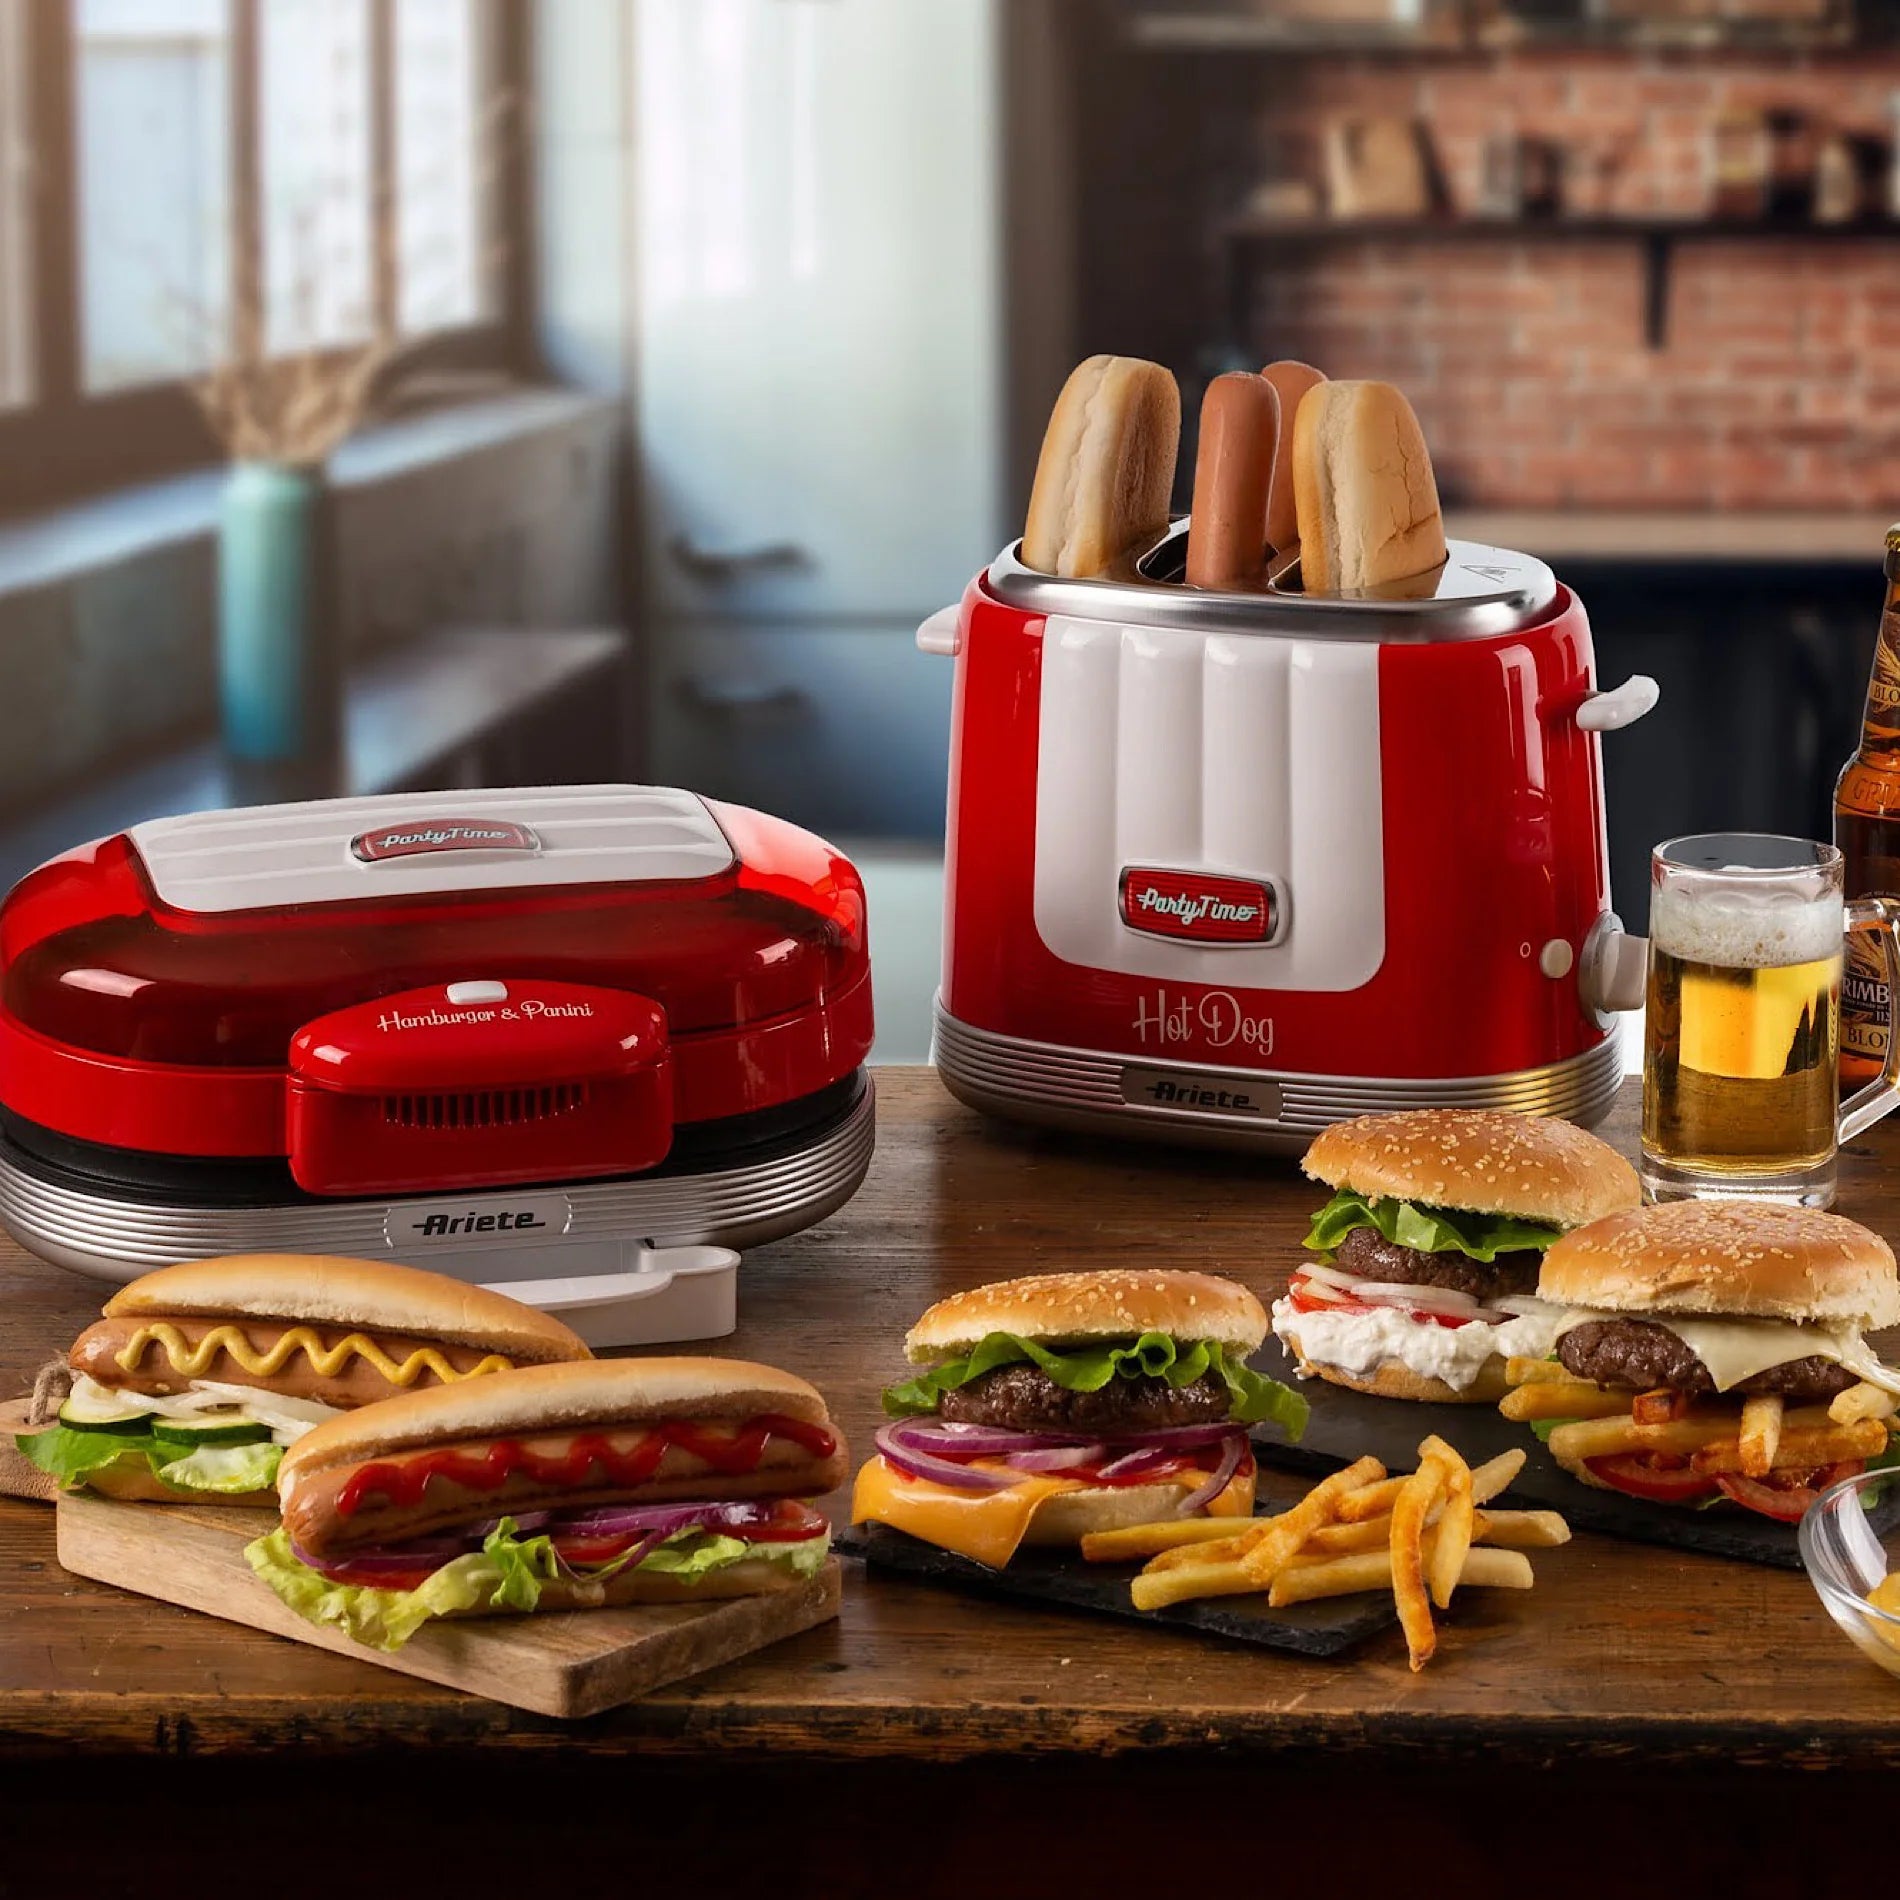 Ariete Hot dog party time maker